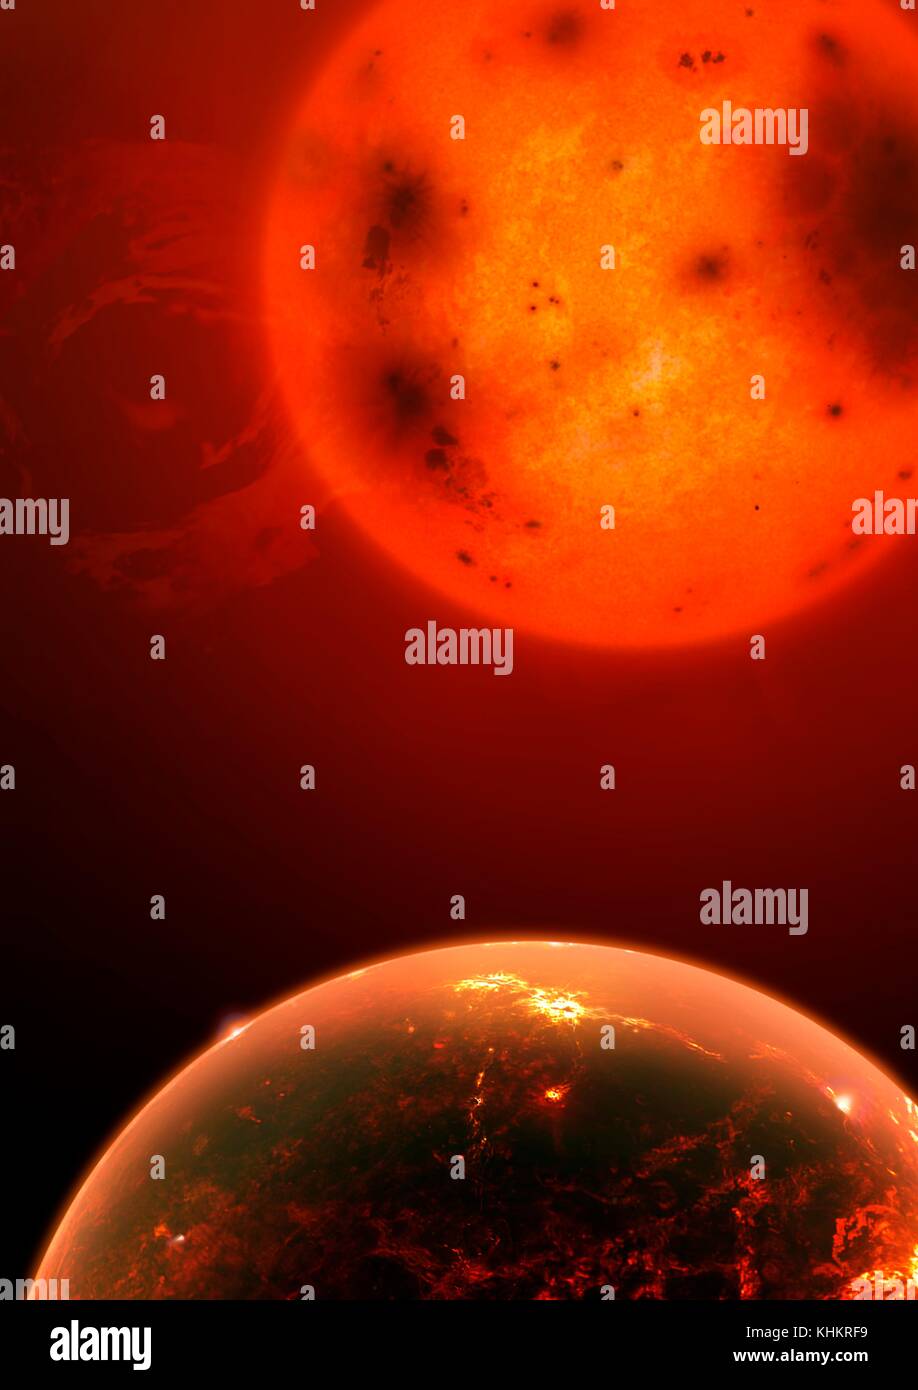 Illustration of the exoplanet Kepler 1649b. This terrestrial (rocky) planet, slightly larger than Earth, orbits a red dwarf star 220 light-years away. The planet orbits its star so closely that the planet receives 2.3 times as much radiation from its star than the Earth gets from the Sun, despite the Sun being far more luminous. In this image, the planet is depicted as somewhat like Venus was in the past, hot and highly volcanic. Astronomers have singled out Kepler 1649b because it is one of several prime candidates for atmospheric research in future space studies. Stock Photo